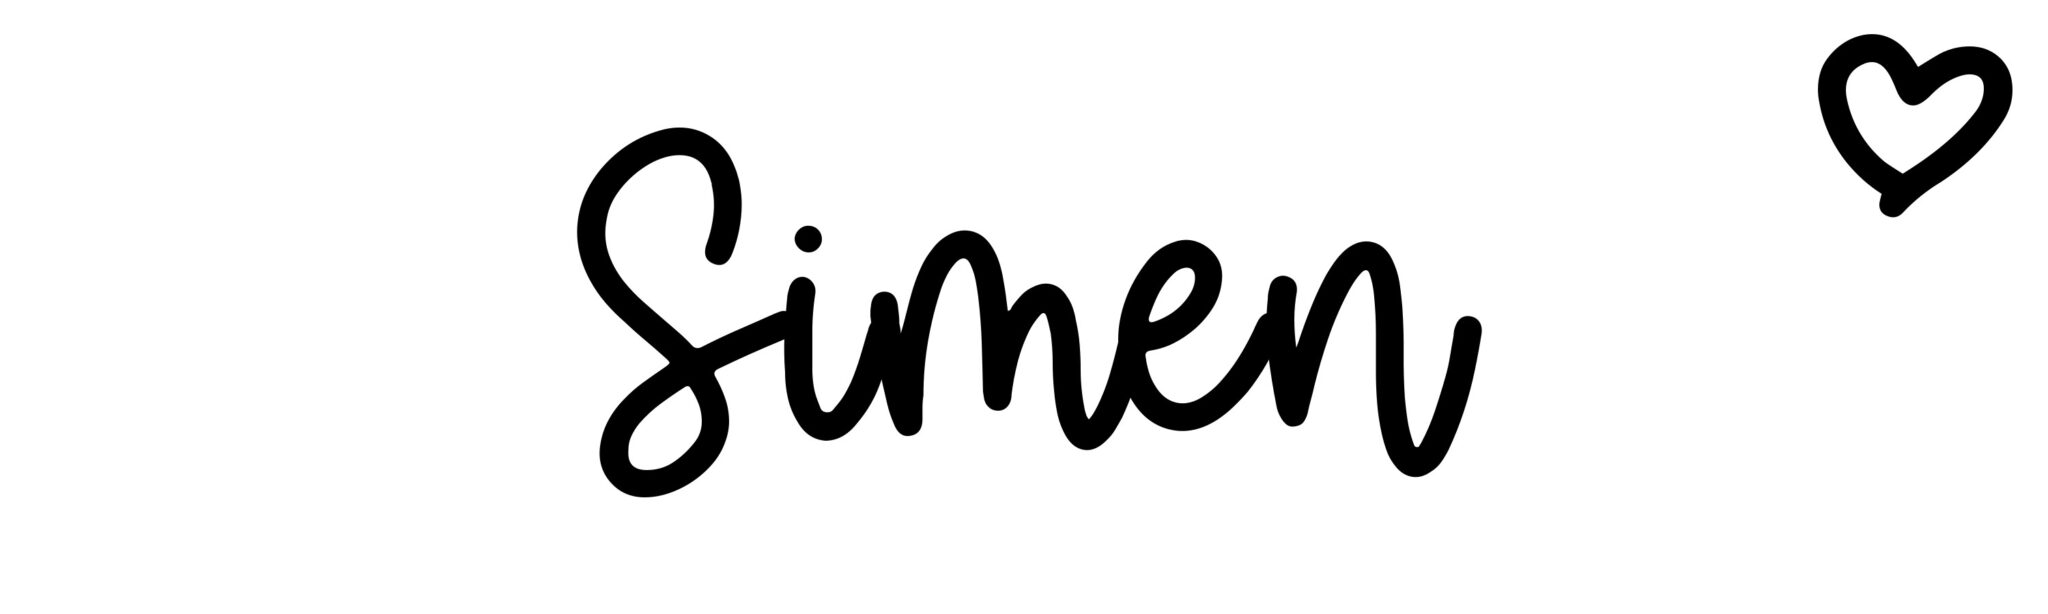 Simen - Name meaning, origin, variations and more